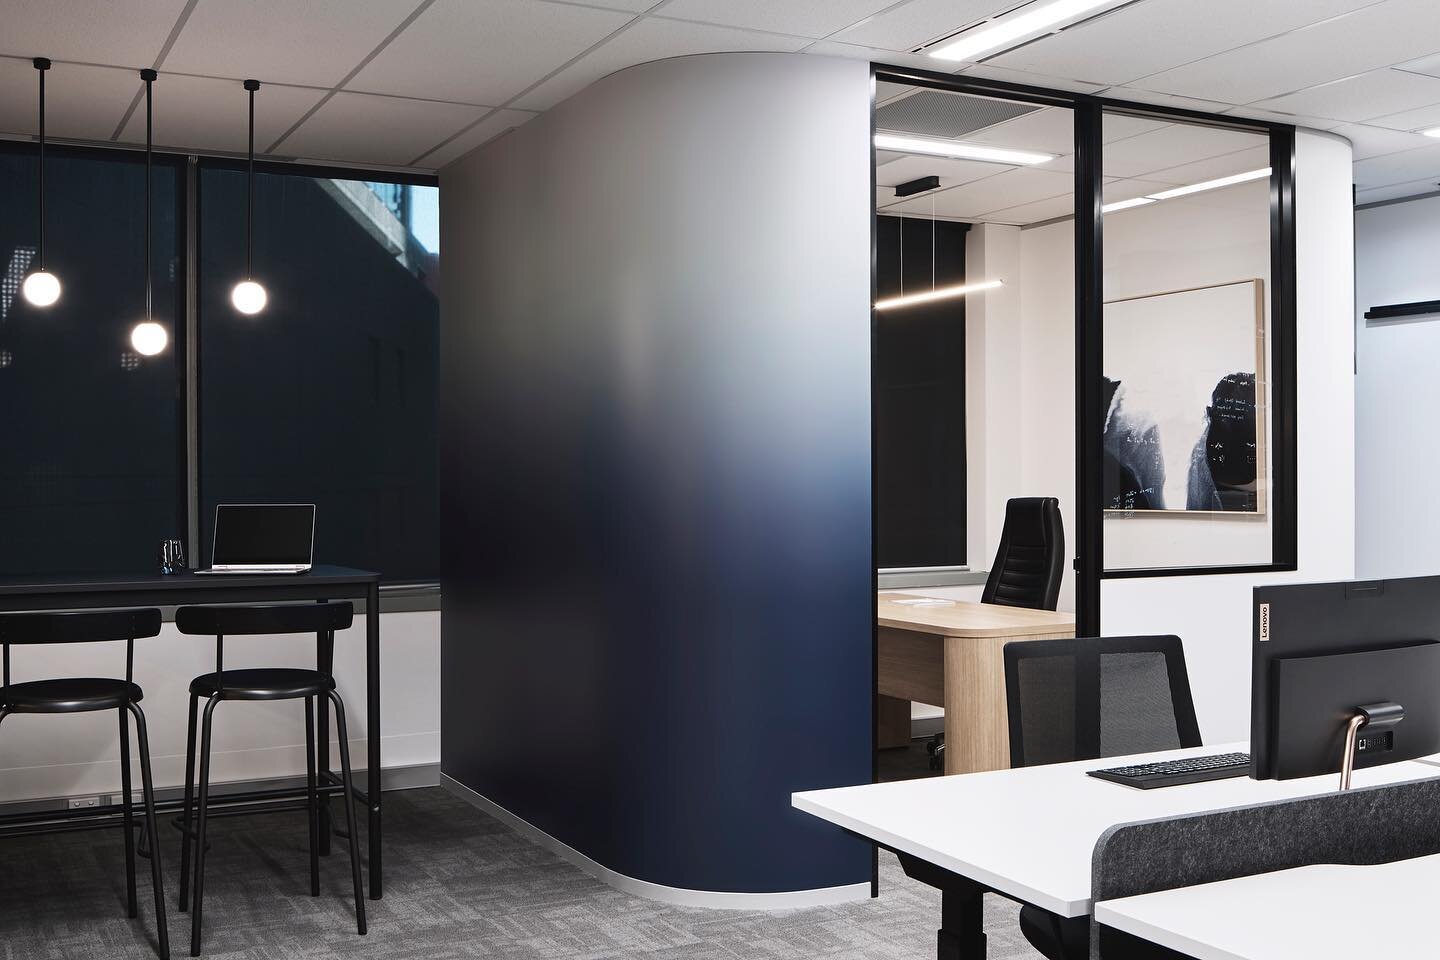 ⚪️ The design of the SDP Solutions Office space prioritizes a blend of playfulness and privacy, aiming to establish a unified and seamlessly connected working environment. The carefully selected colors at individual workstations distinguish the vario